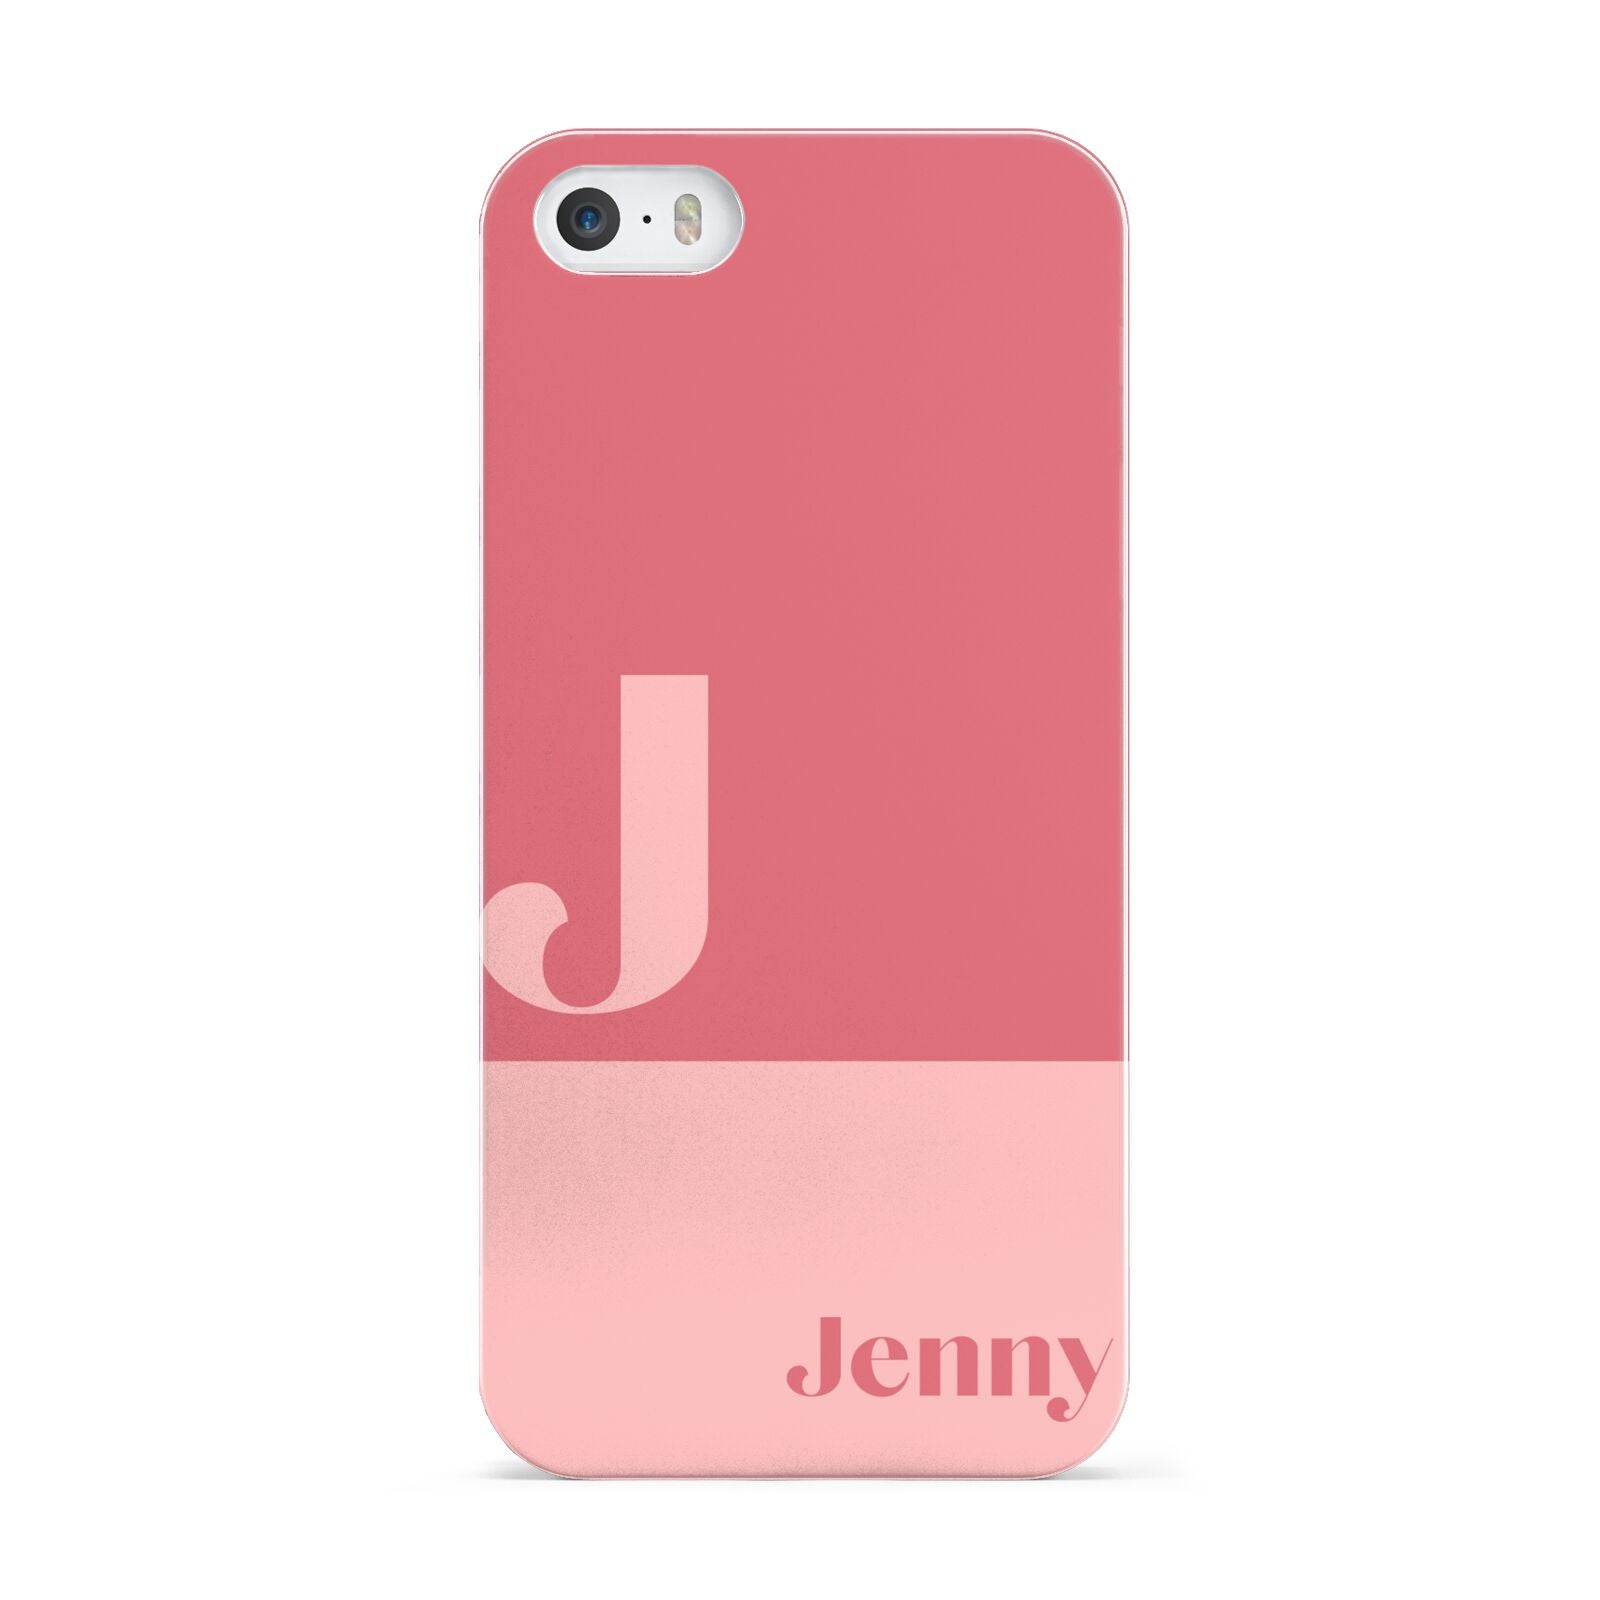 Contrast Personalised Pink Apple iPhone 5 Case